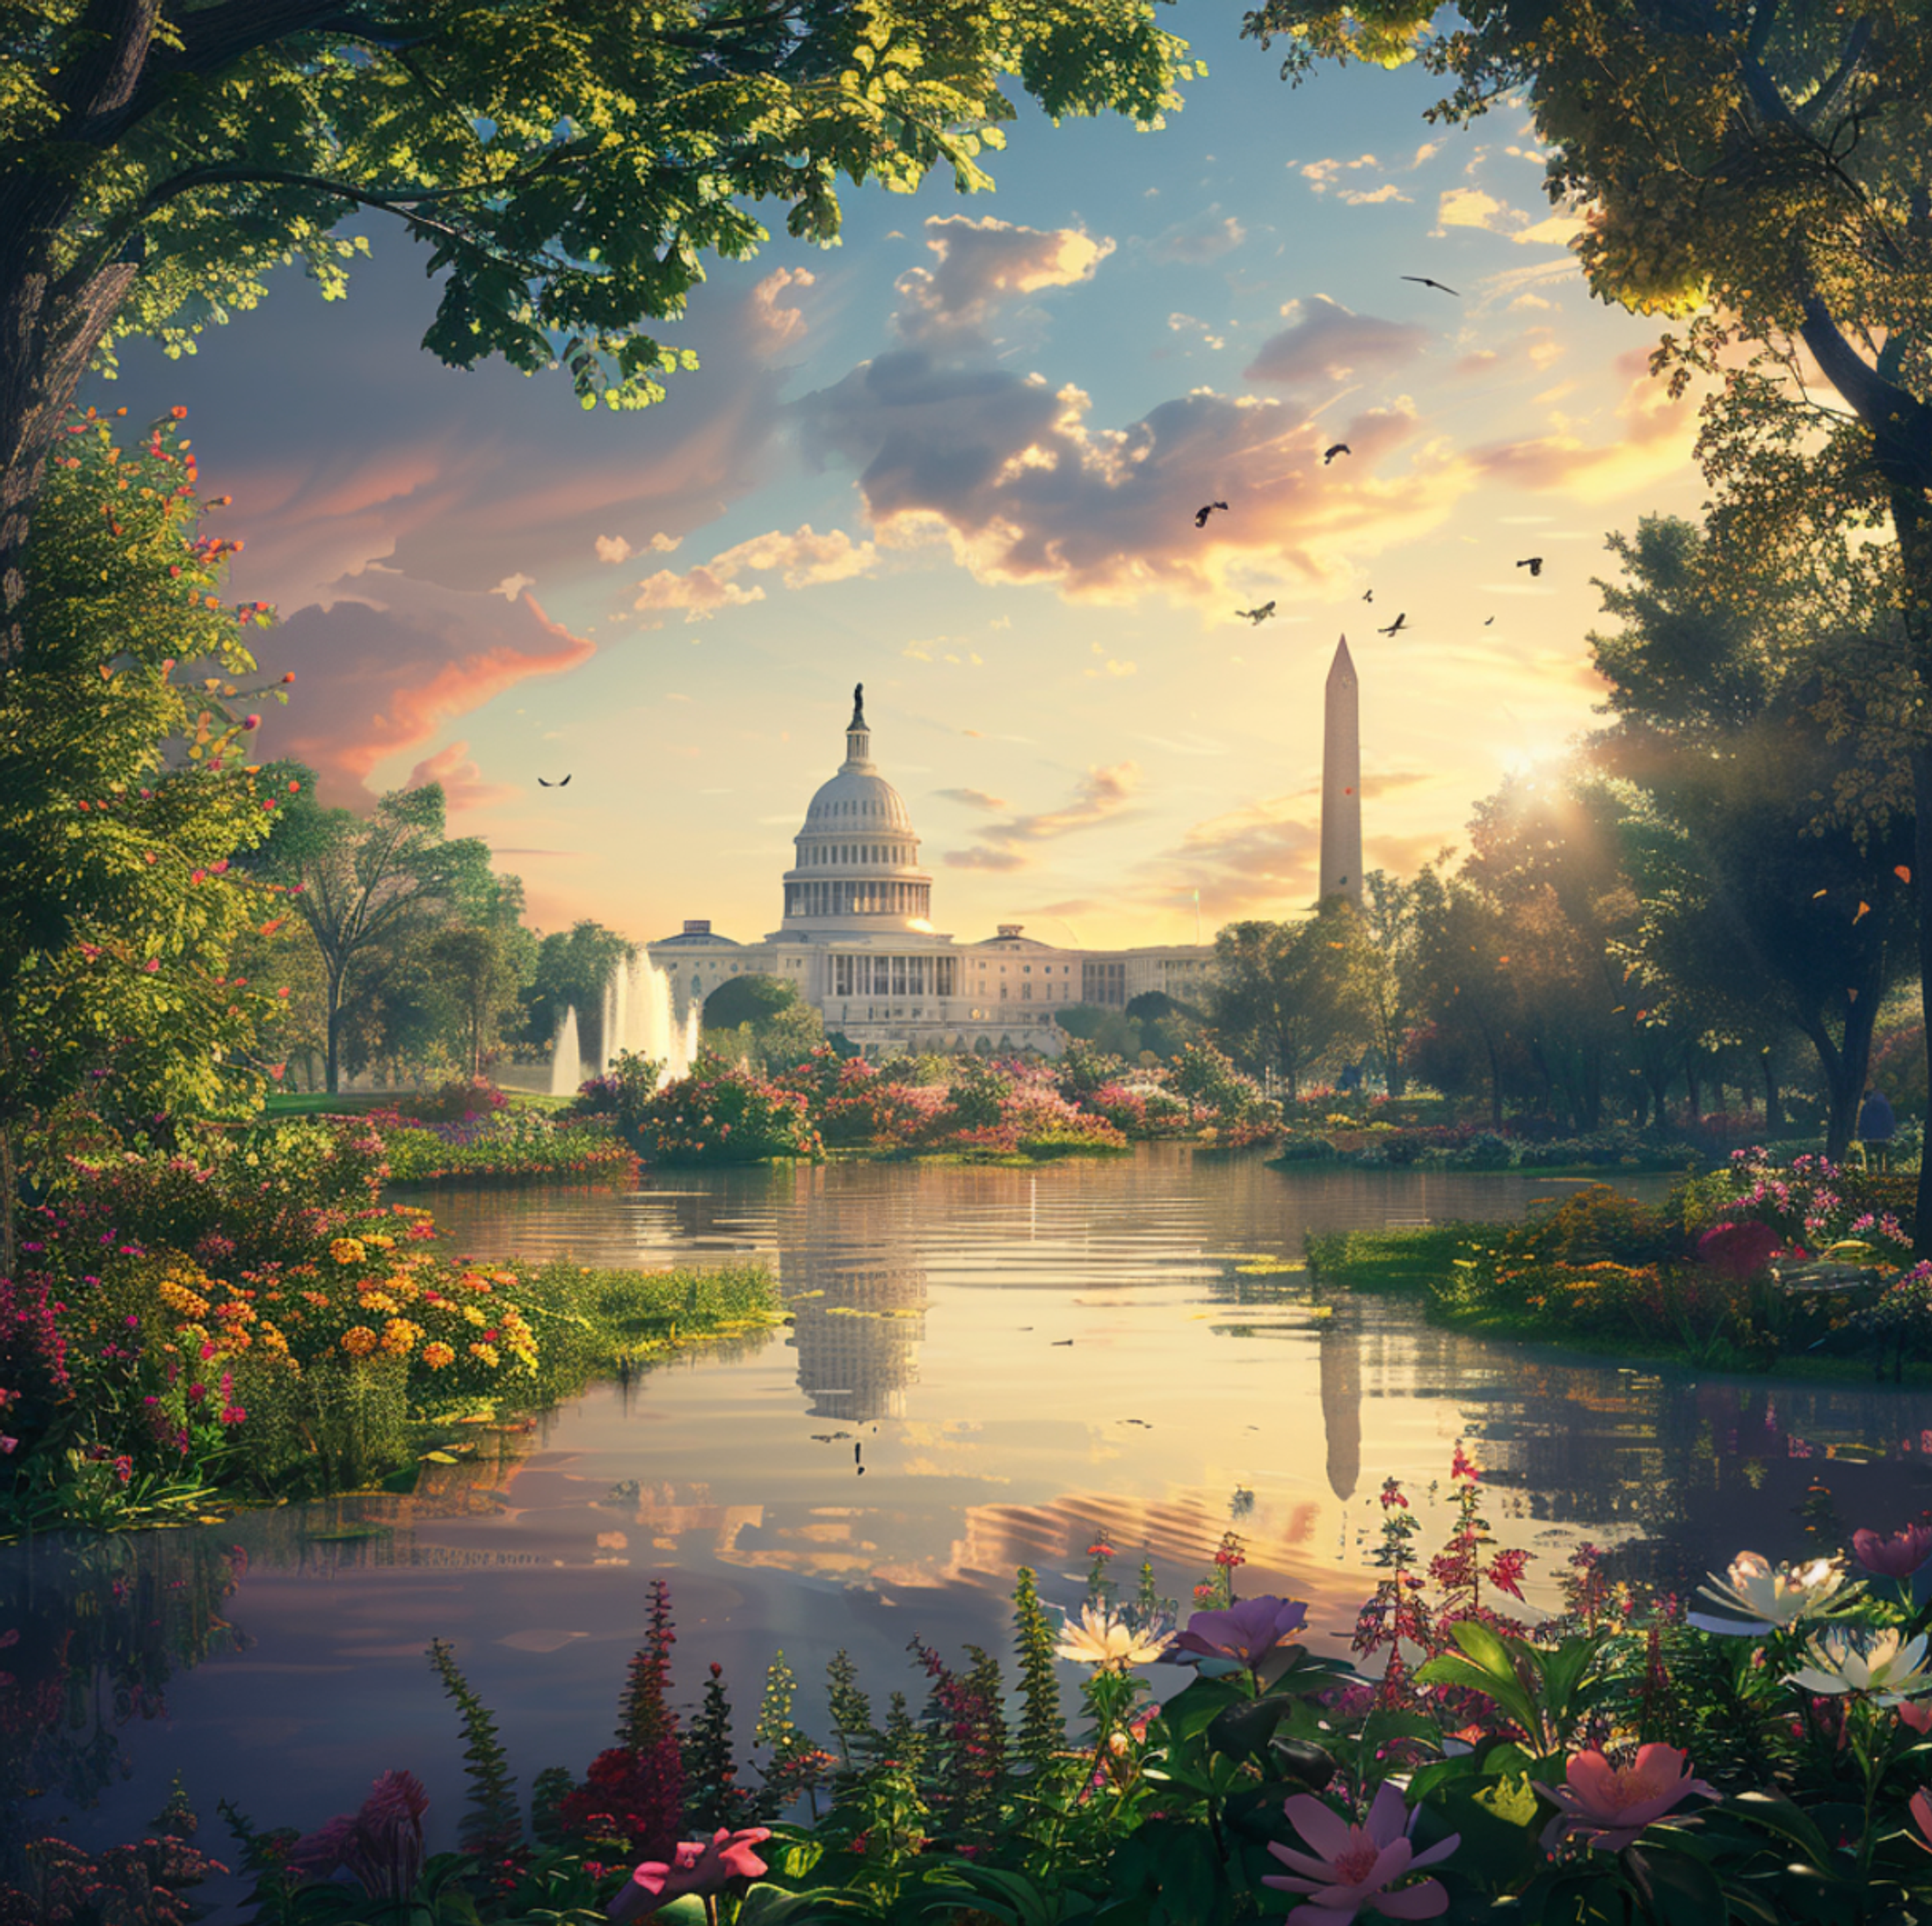 Enchanting sunset view of the United States Capitol Building and Washington Monument in Washington, D.C., with reflections on a calm pond surrounded by lush gardens and flowering plants, conveying the capital's historical significance amidst natural beauty.